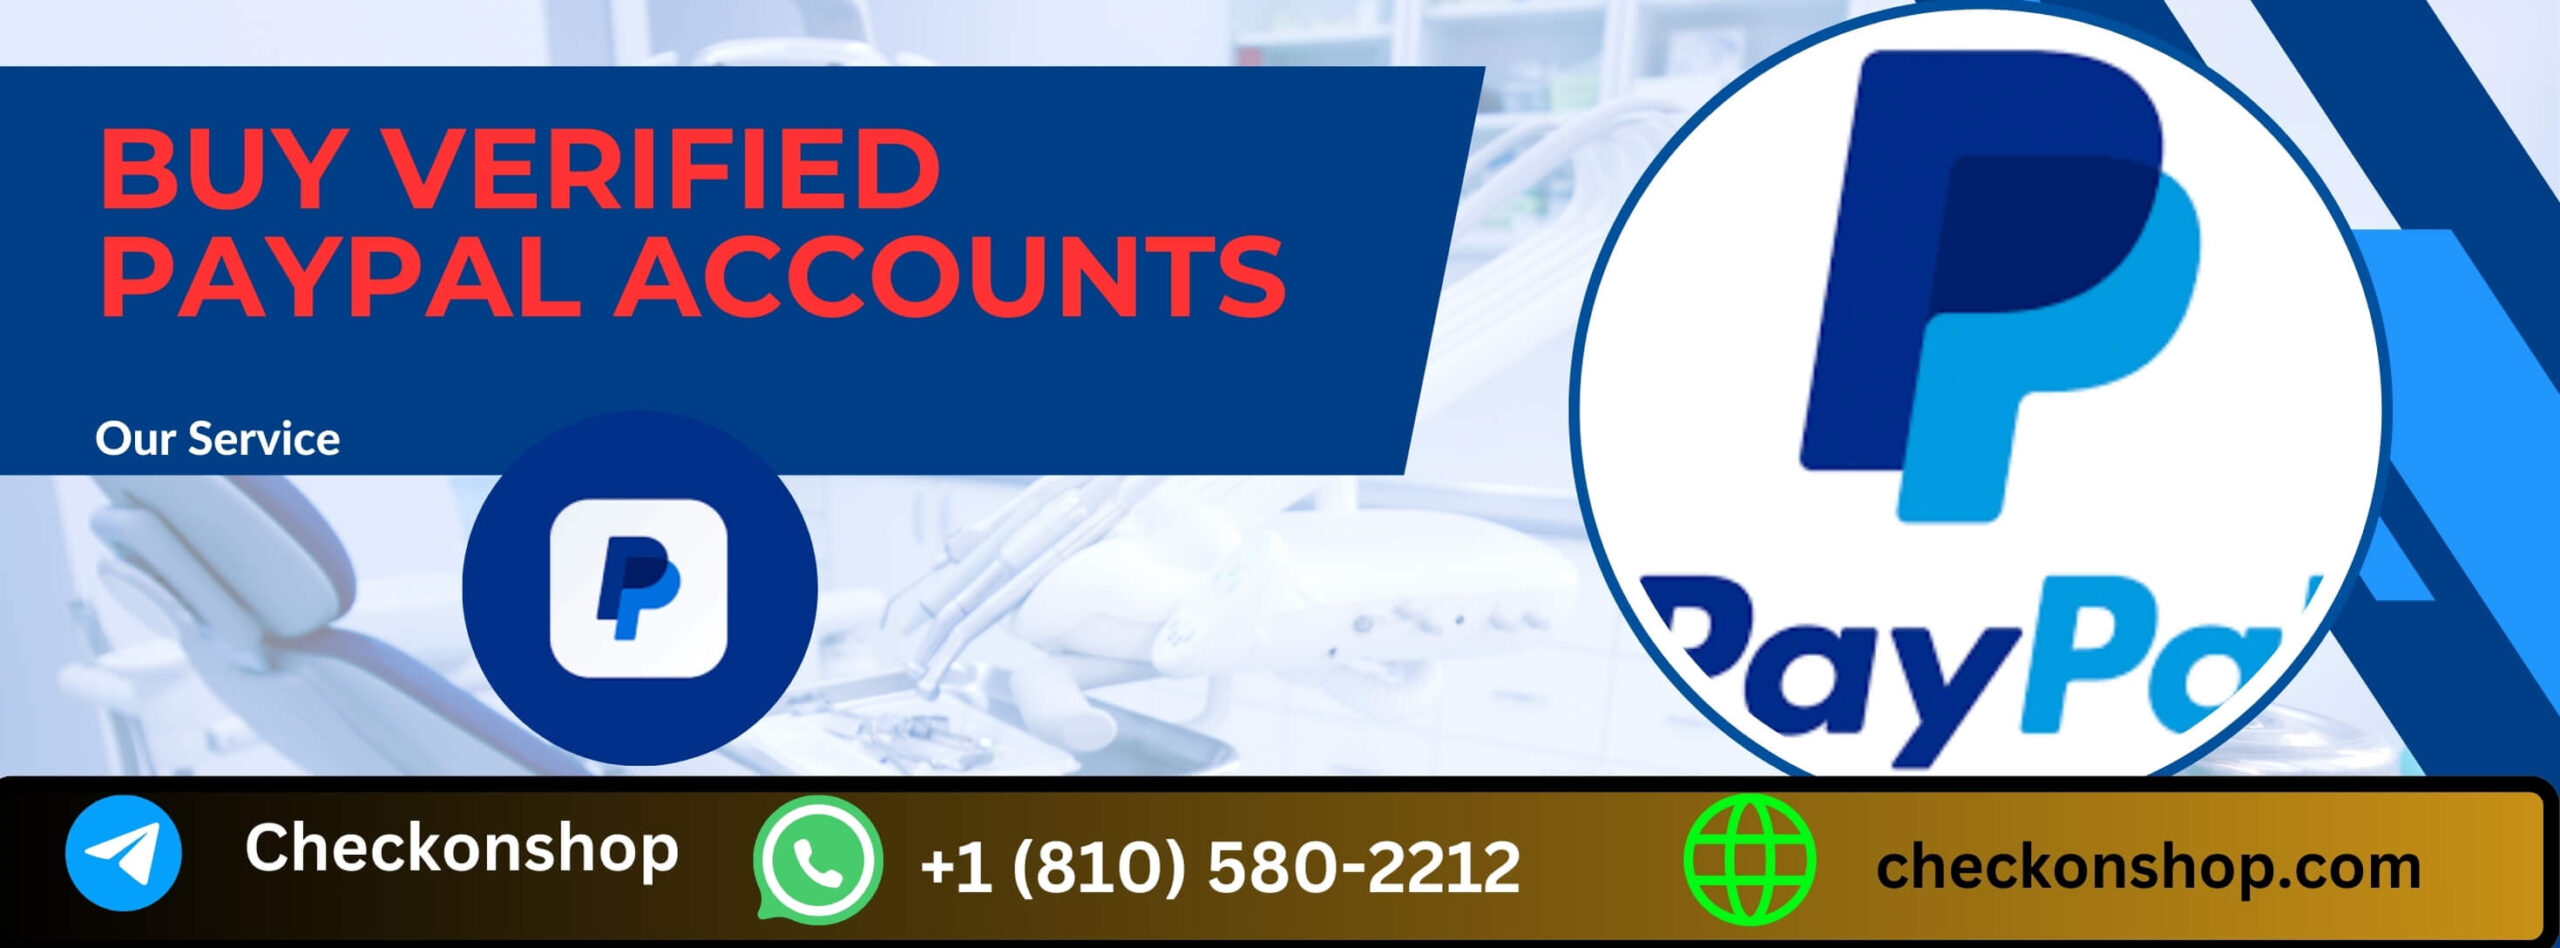 Buy Verified PayPal Accounts 1